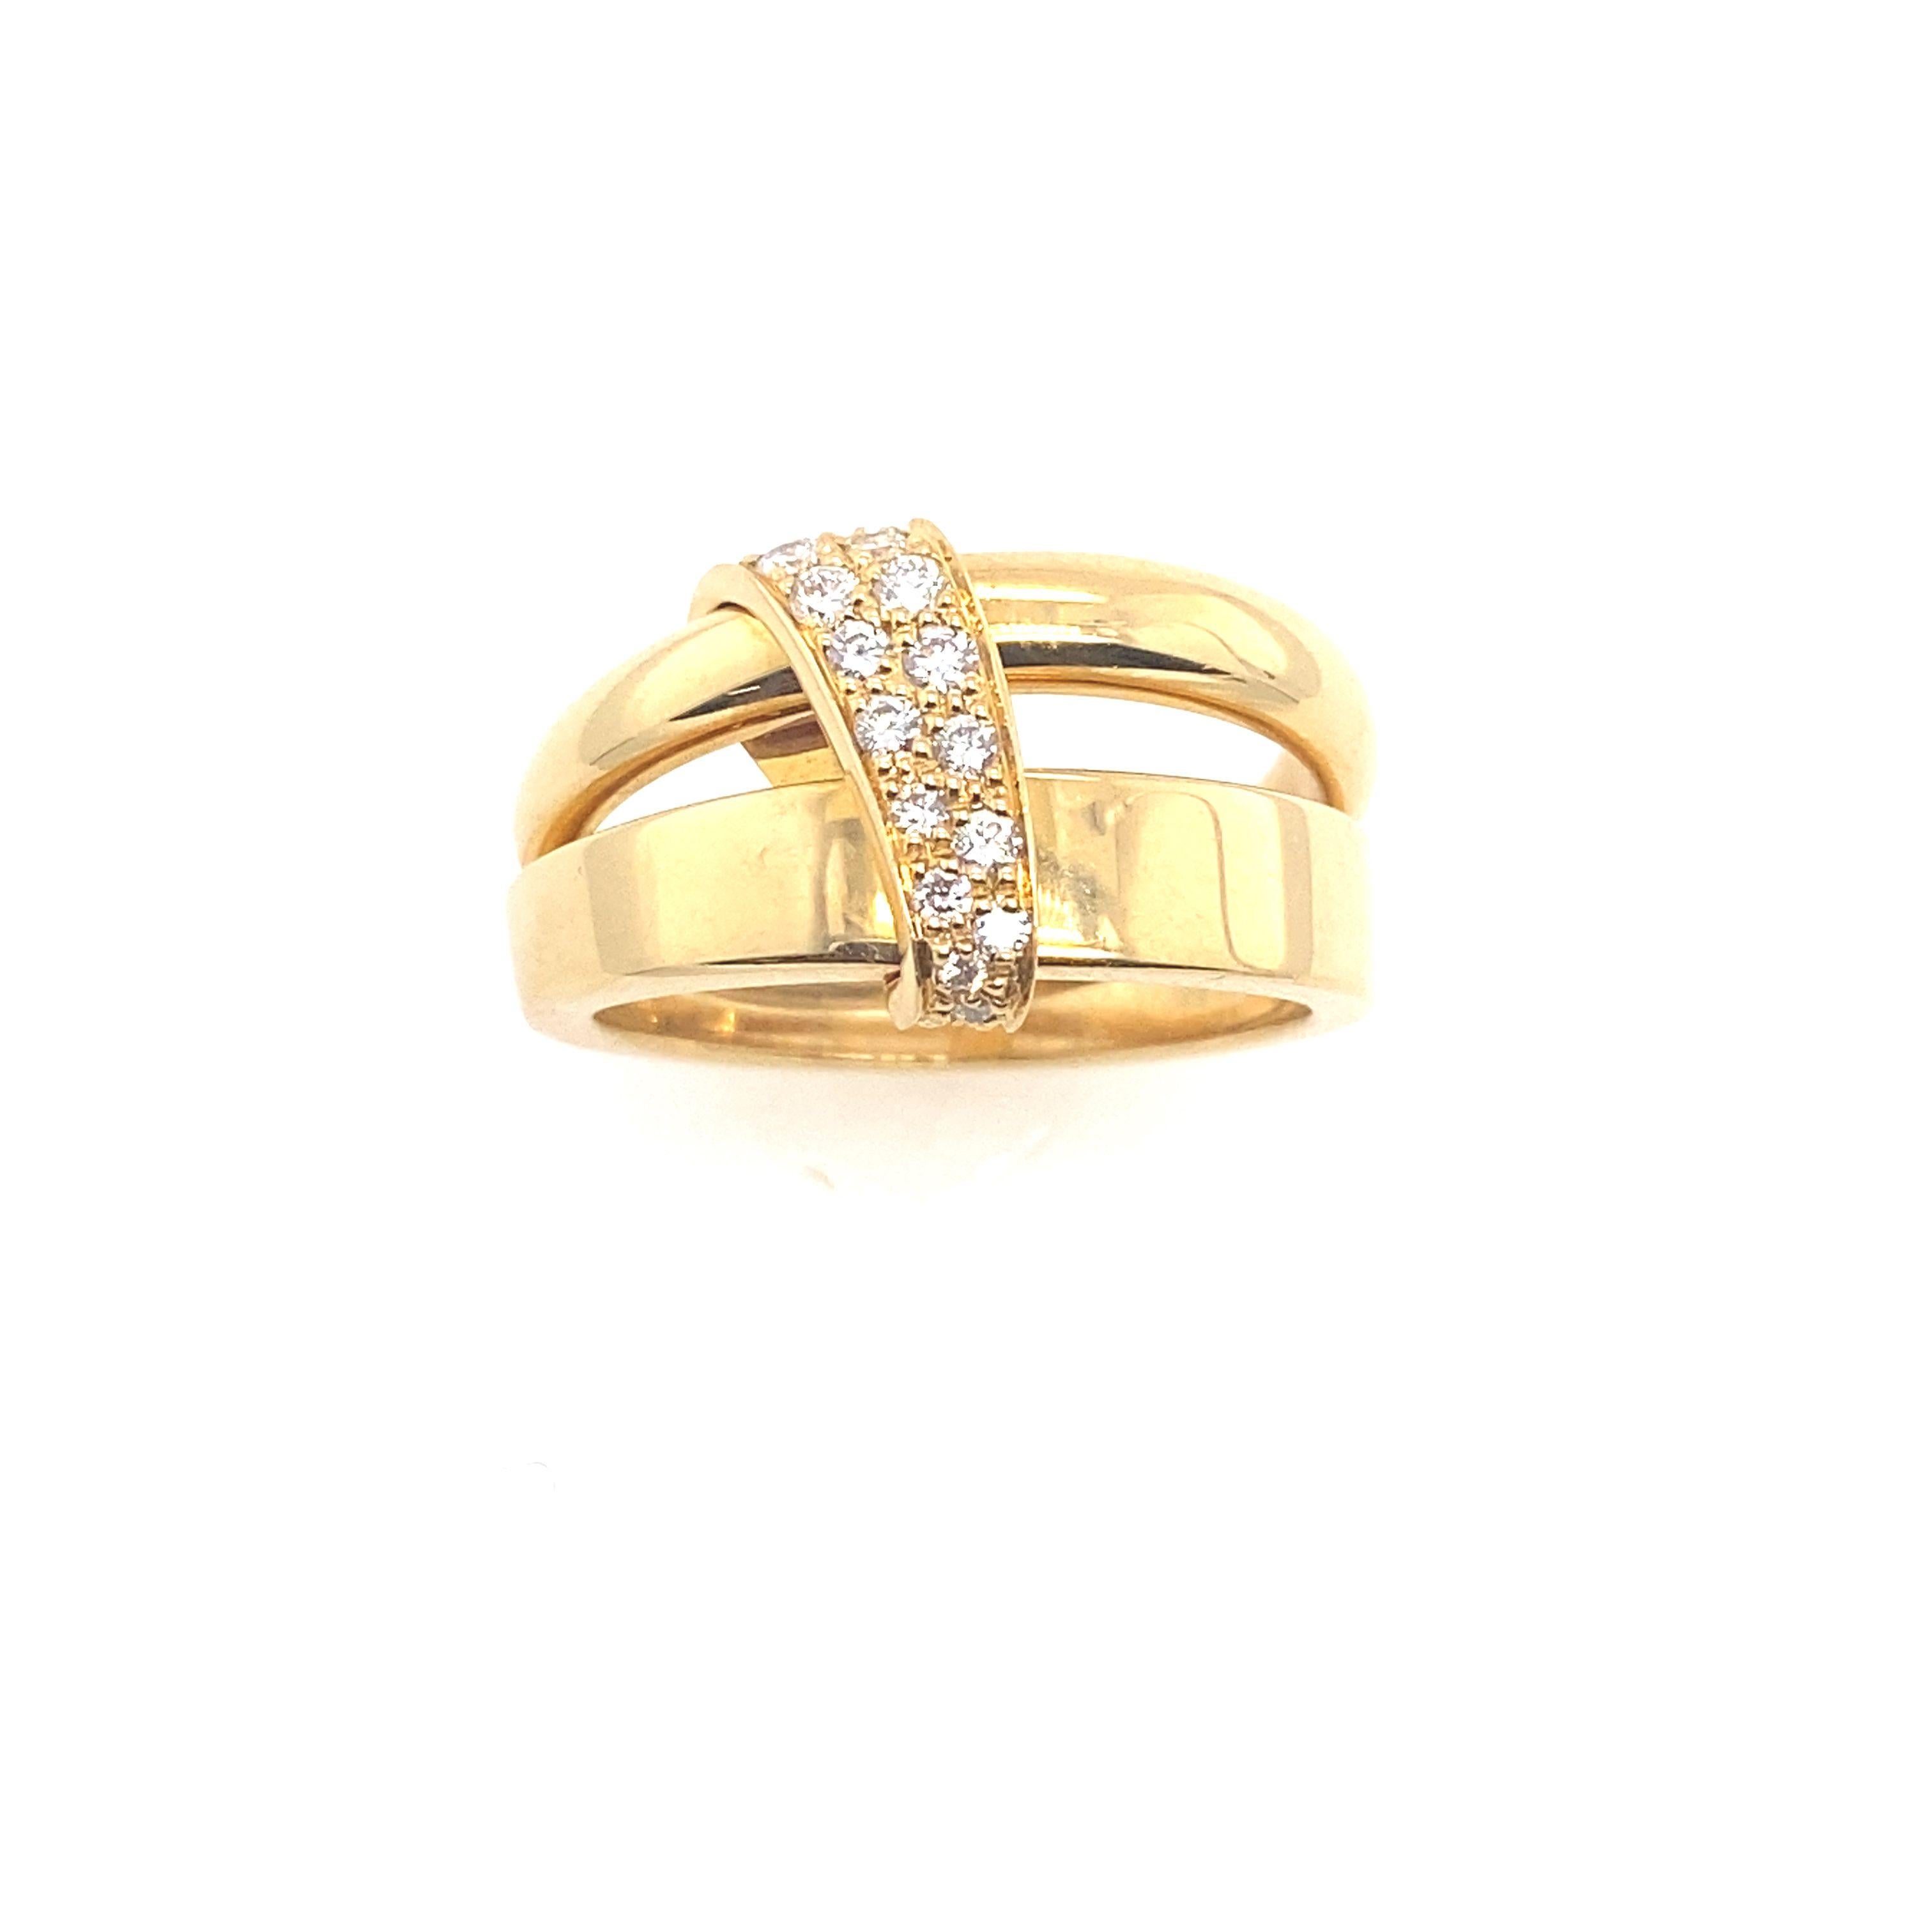 This Asprey Diamond ring is stunning and would make a wonderful gift for someone special.  Covered in 0.65ct of natural round brilliant cut diamonds and crafted from 18ct yellow gold,  this ring will be a treasured possession for many years to